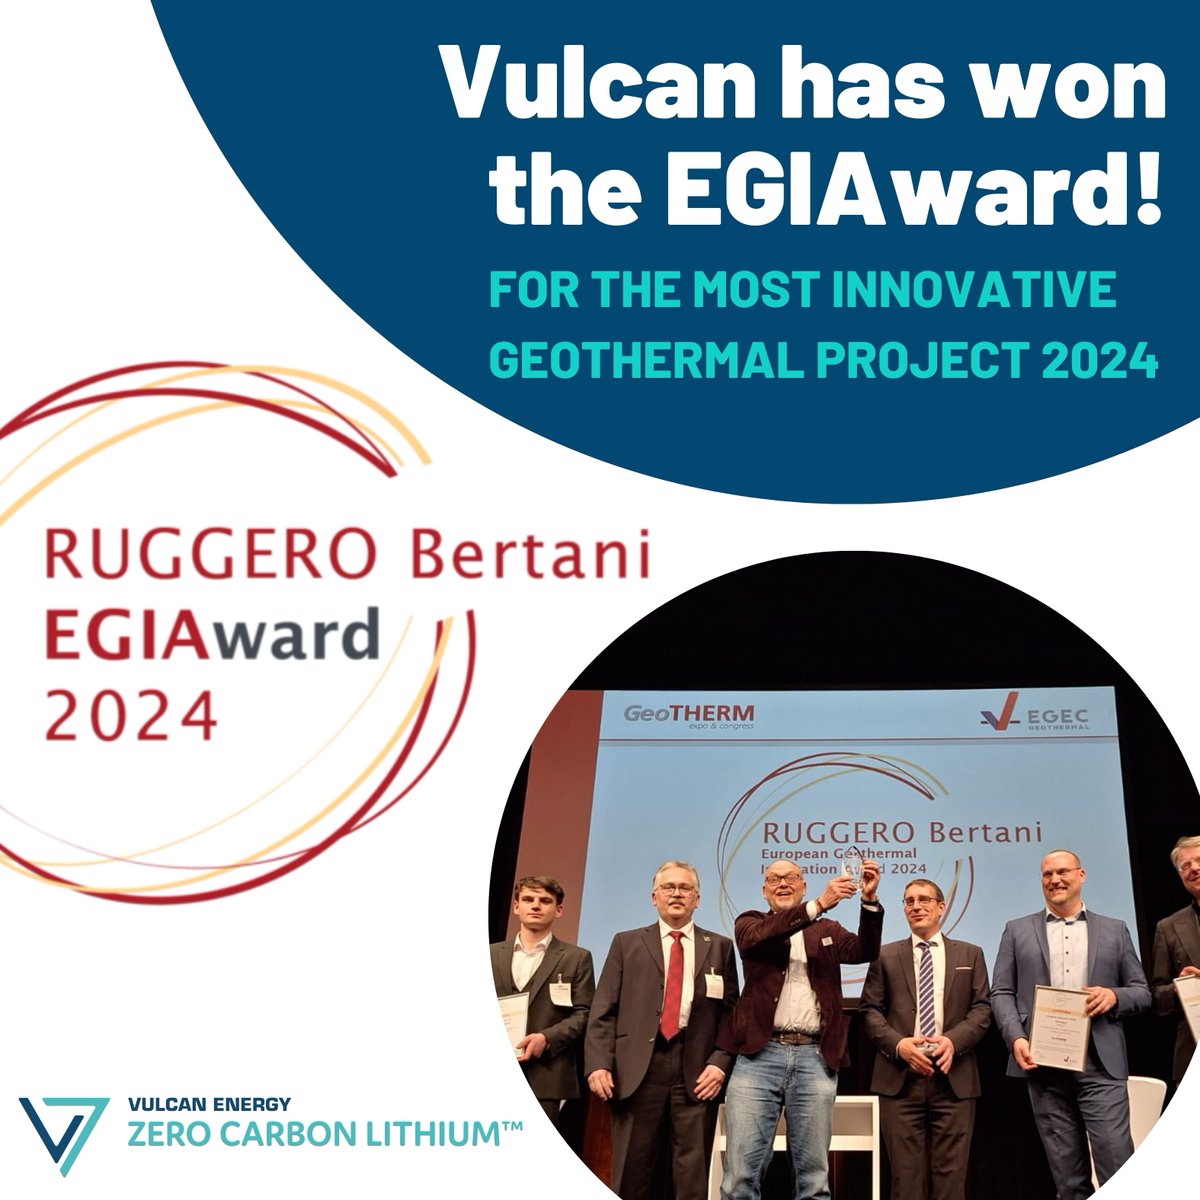 We are delighted to announce that we have won the 'Ruggero Bertani European Geothermal Innovation Award 2024' today for the most innovative geothermal project 2024!
$VUL:AX #Delivering #ExecutionReady #ZEROCARBON #LITHIUM™ #Project #Energytransition #Mobilitytransition